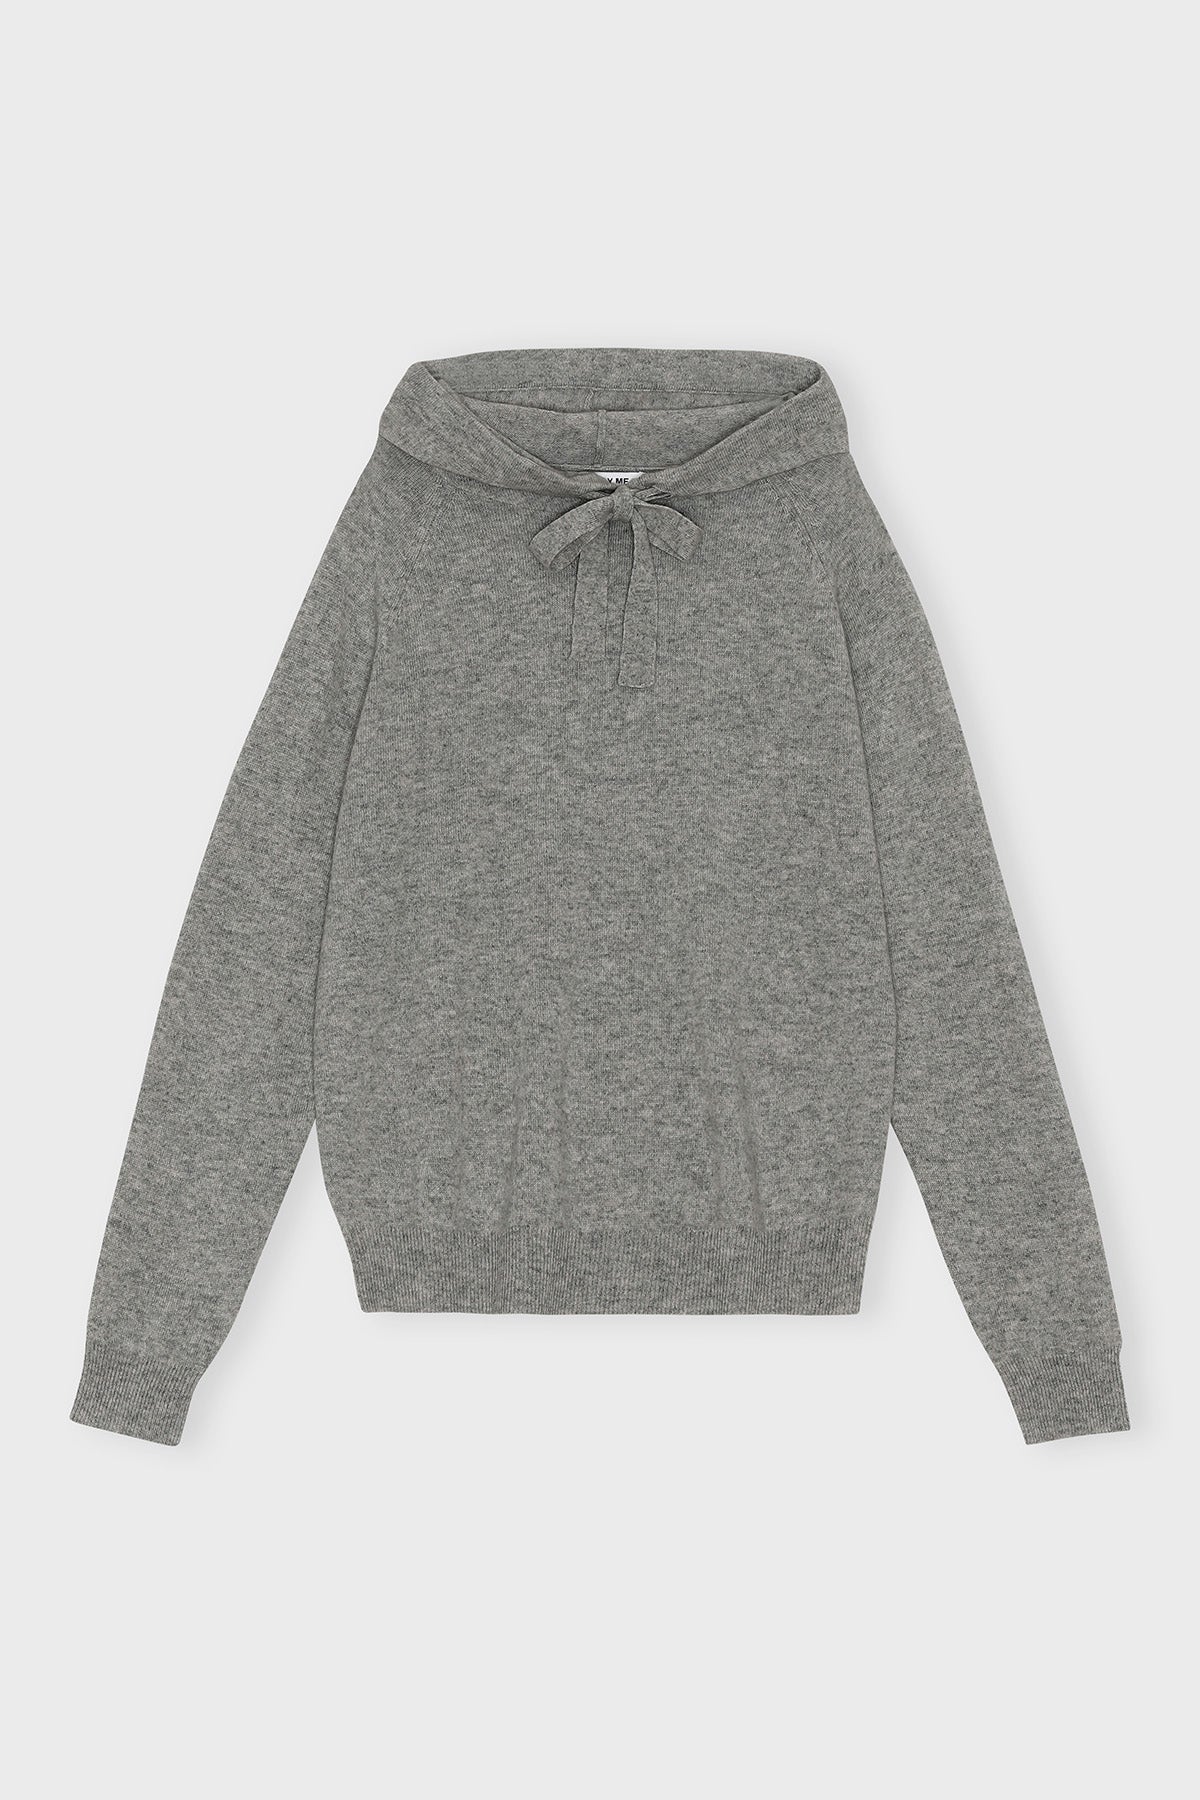 CARE BY ME 100% Cashmere Womens Cathy Hoodie